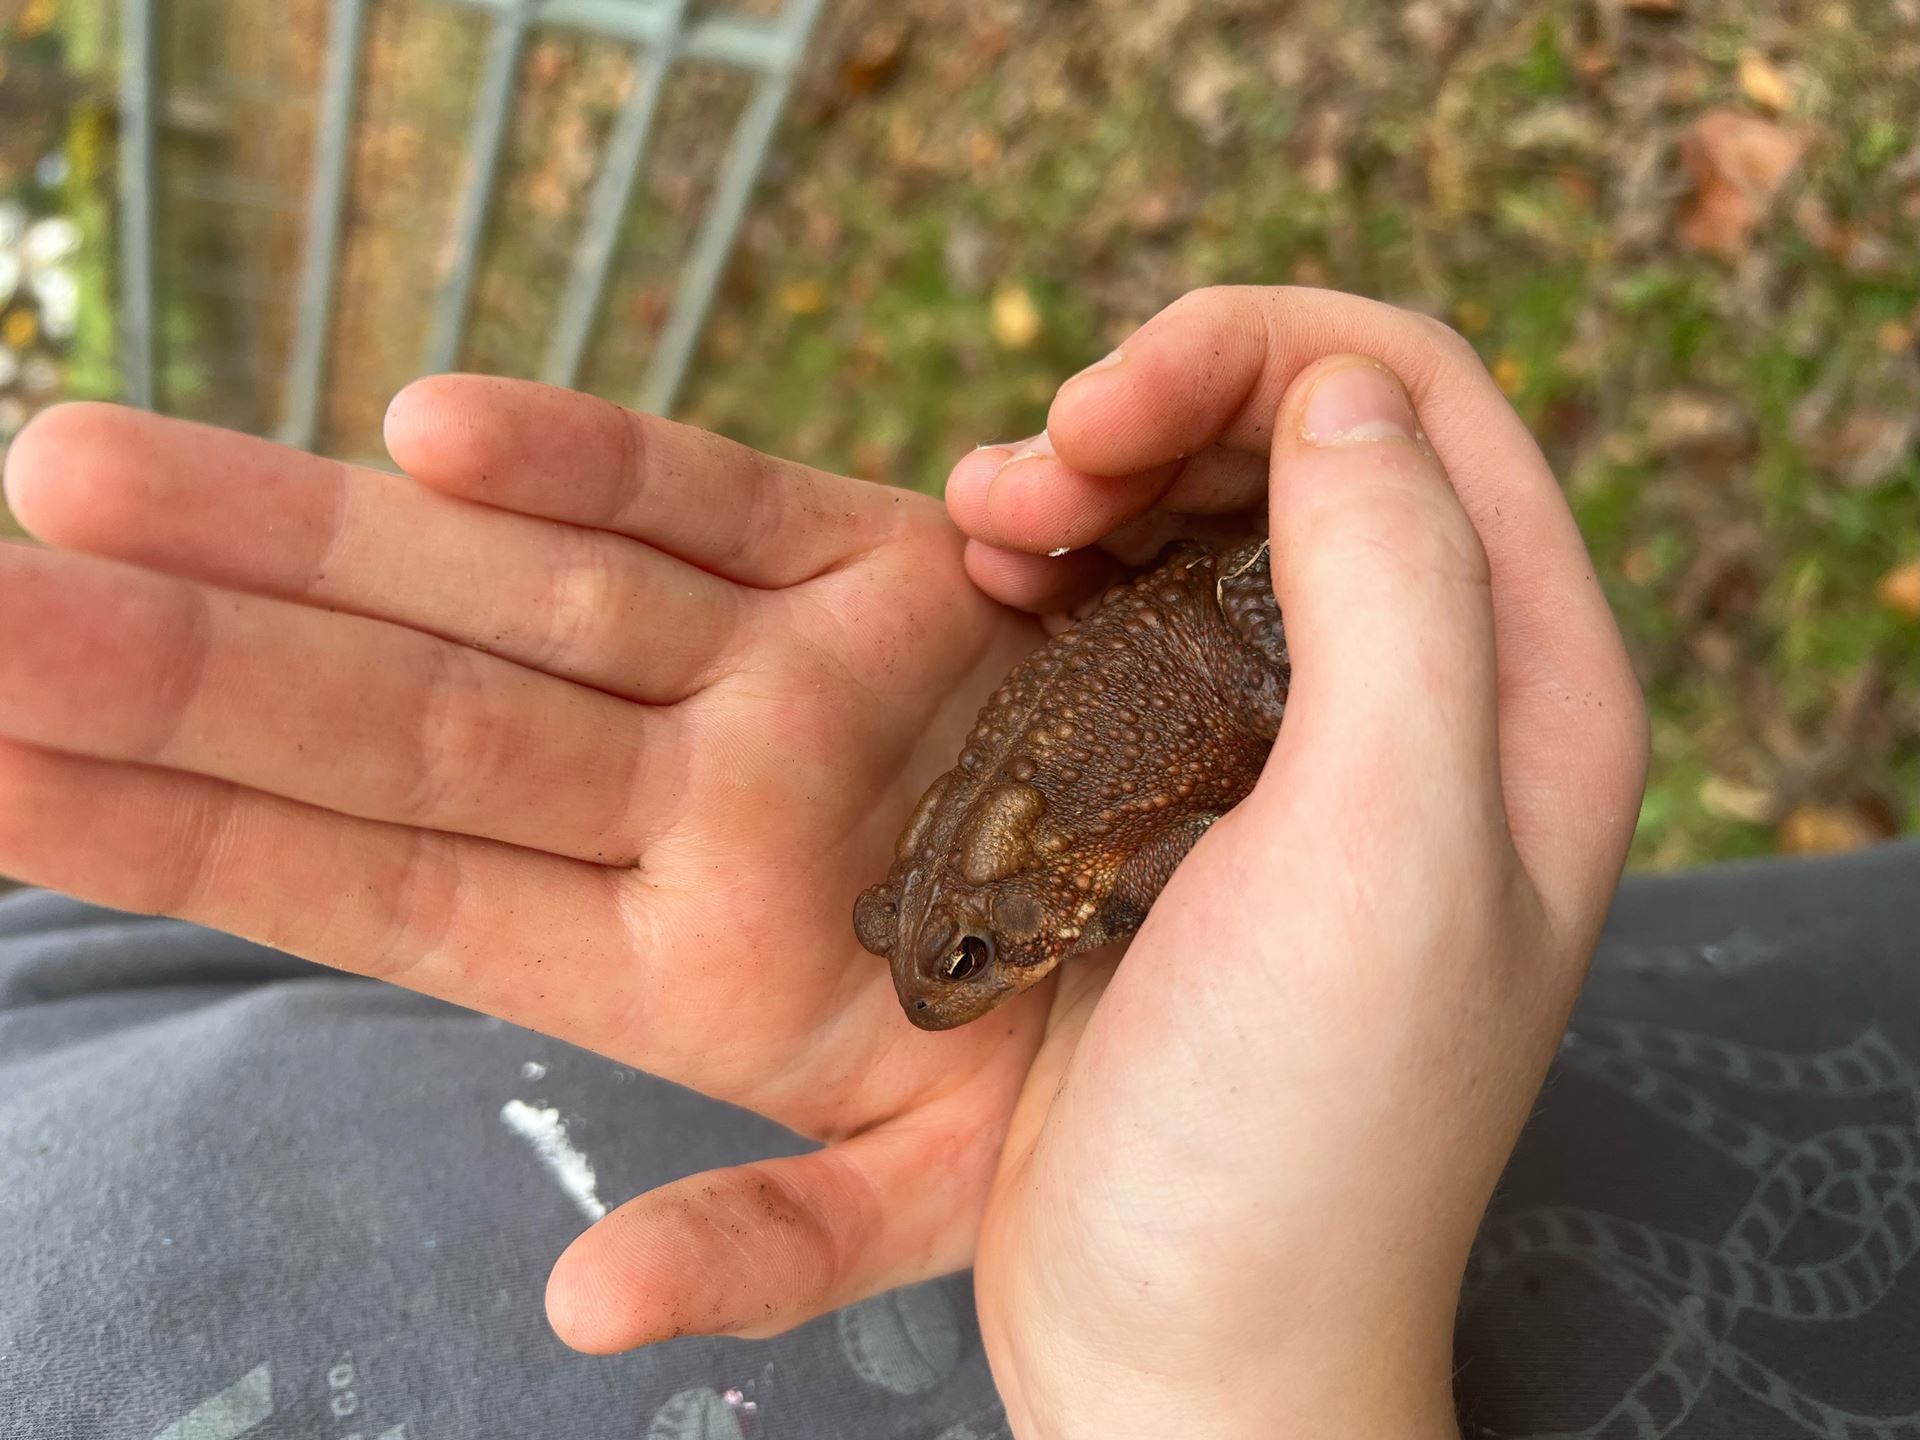 Toad found while composting.